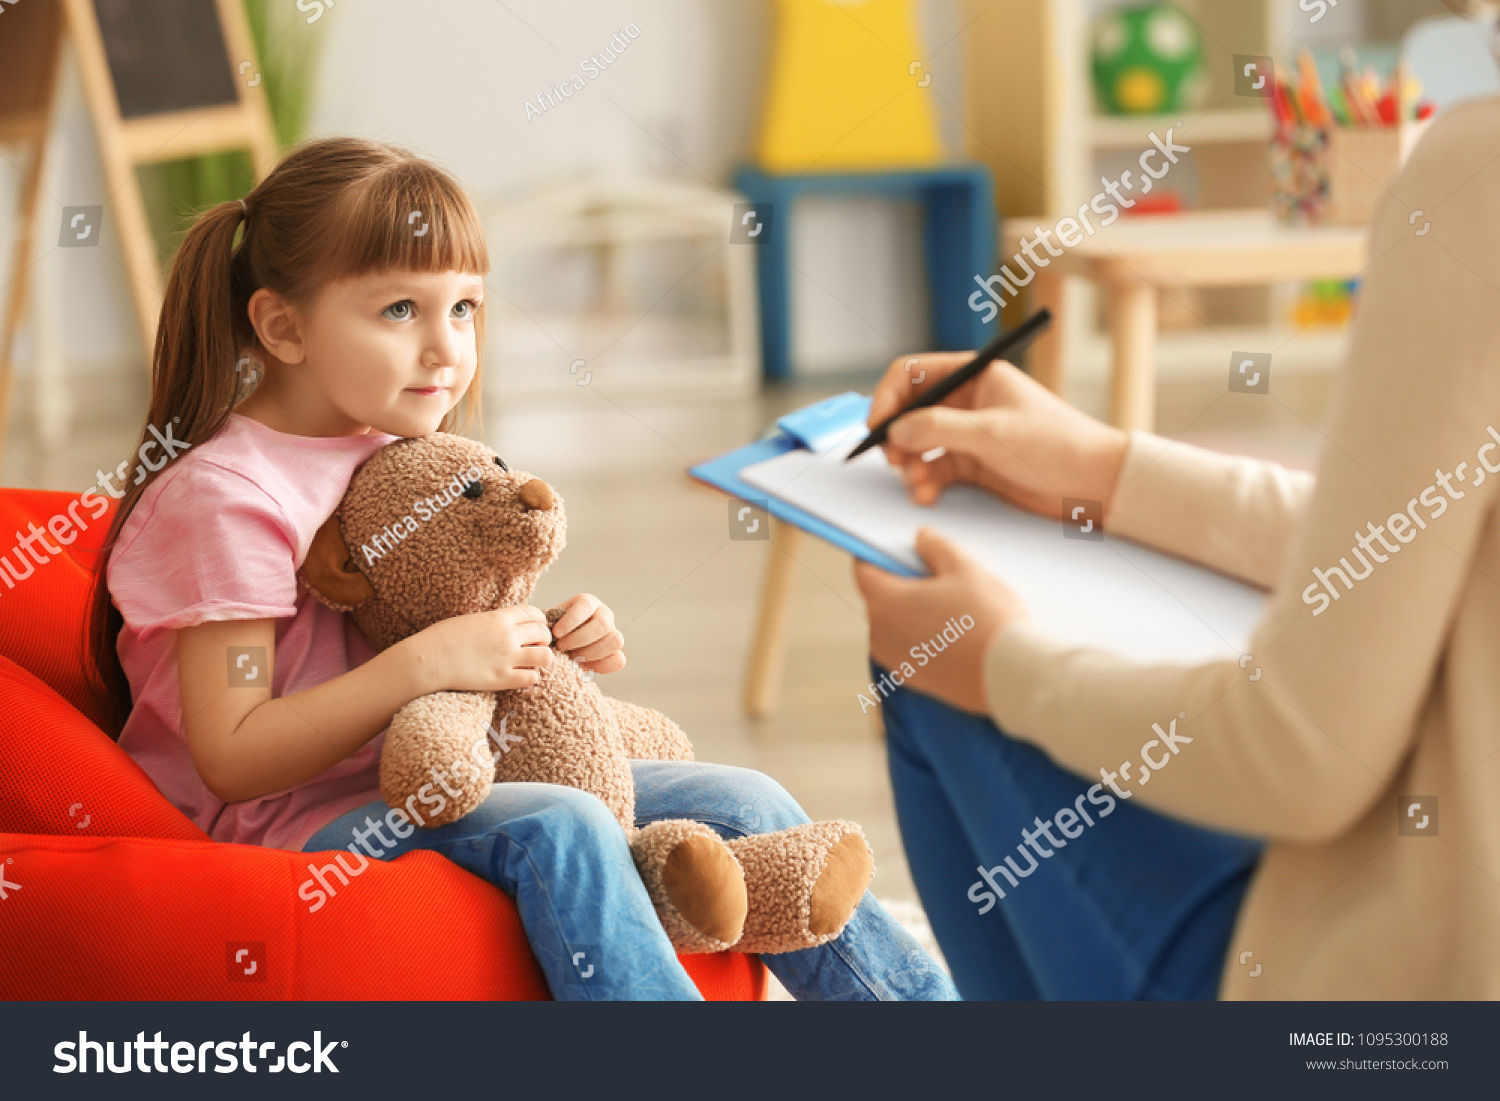 Cute little girl at child psychologist's office #1095300188